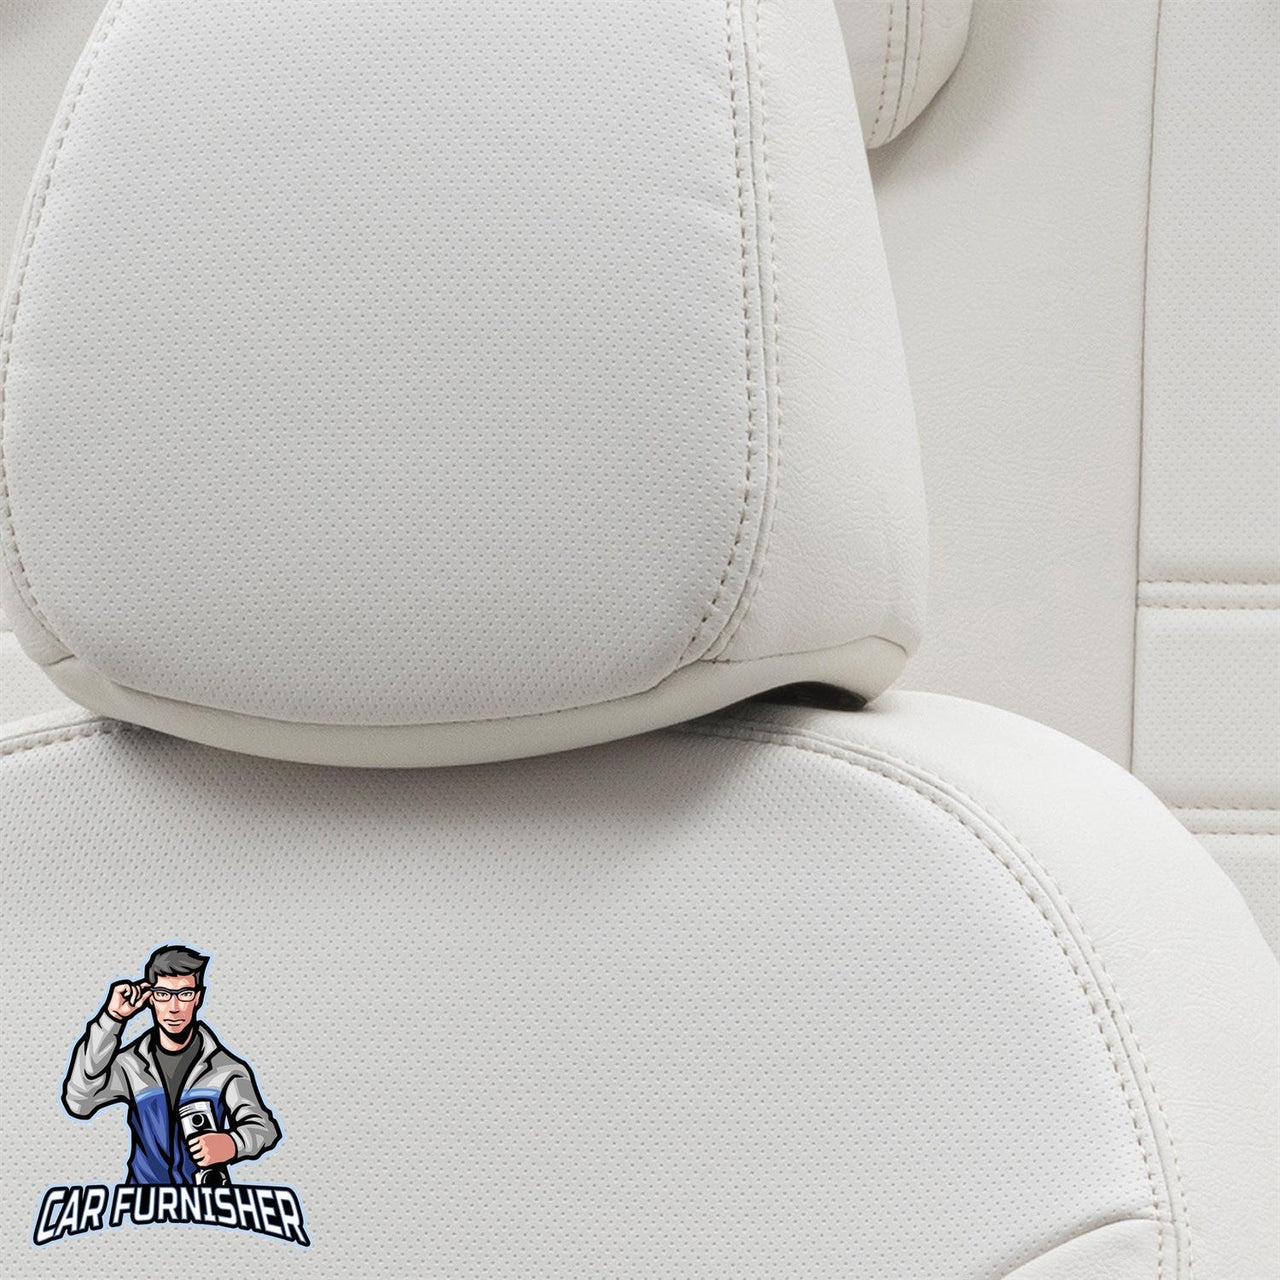 Subaru Legacy Seat Cover Istanbul Leather Design Ivory Leather